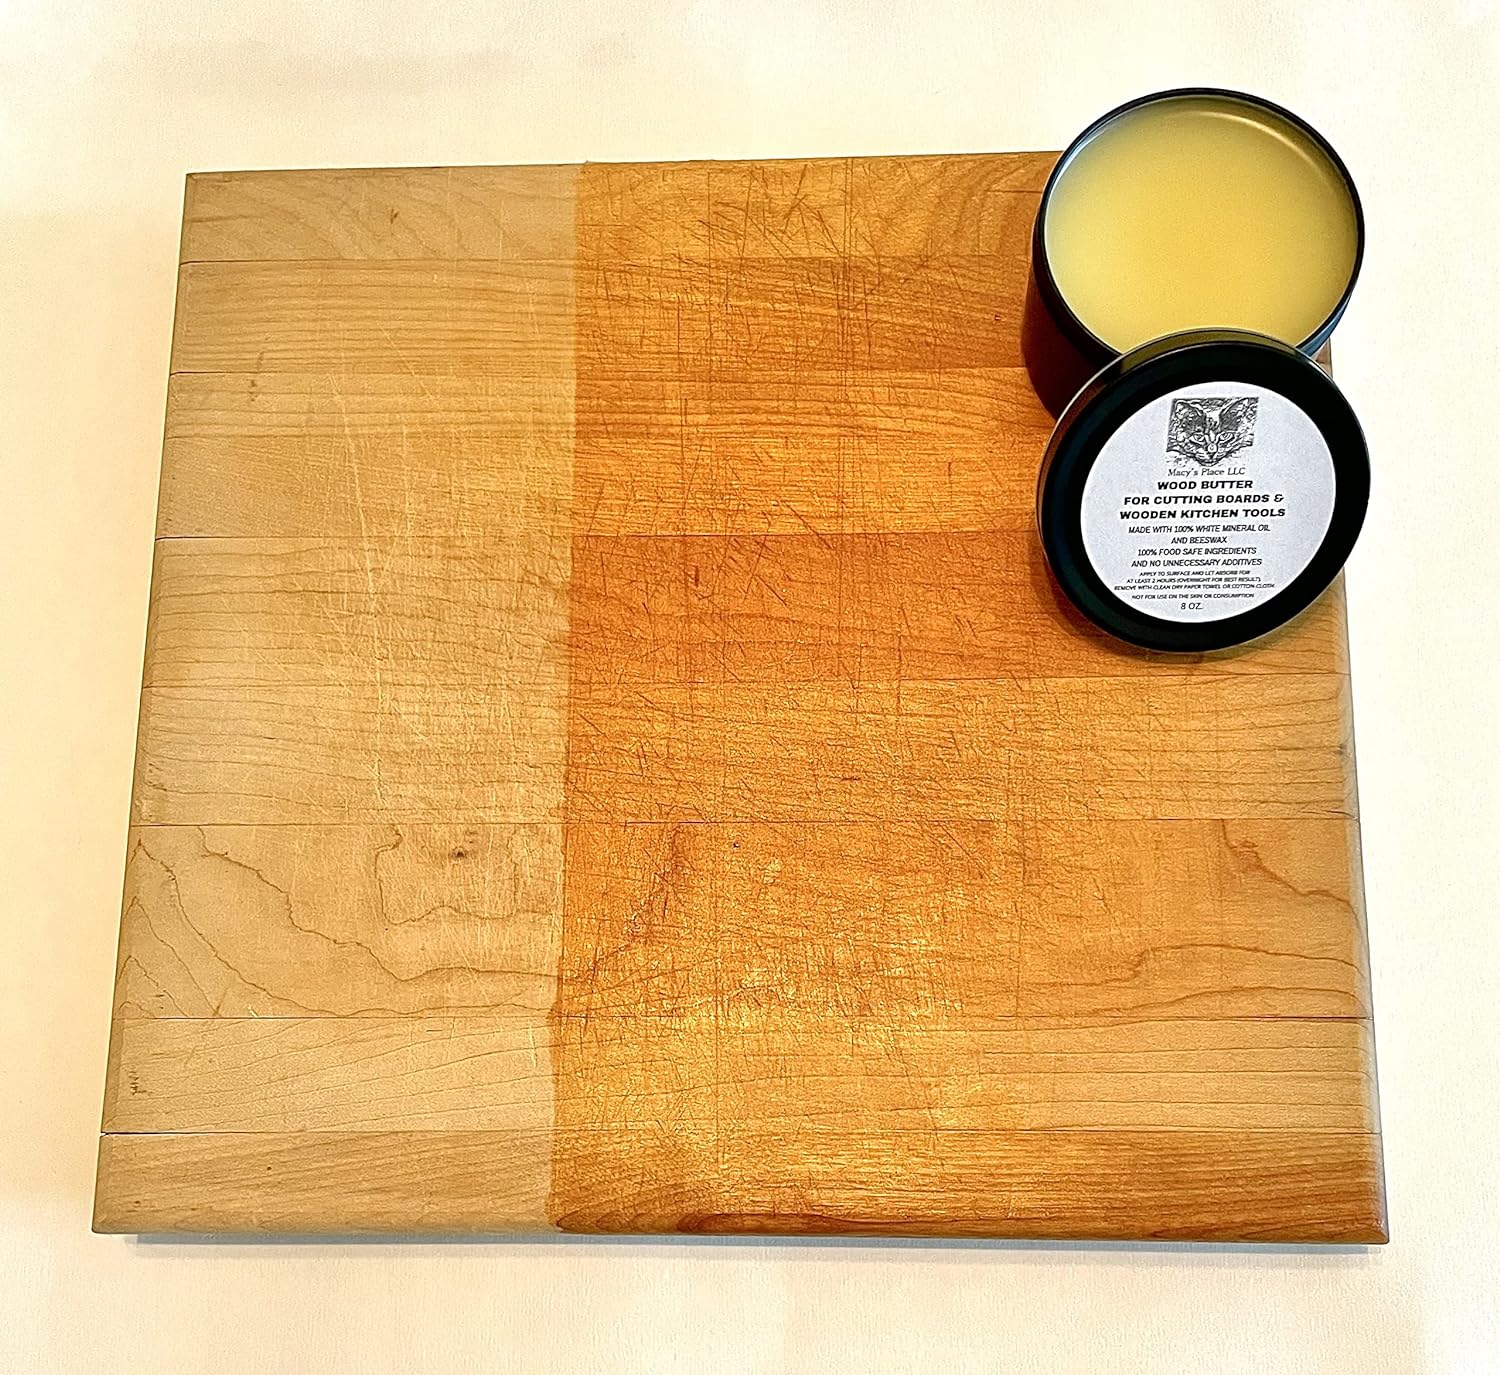 Wood Butter Cutting Board Wax - 8 oz - Conditioner for Butcher Block and Wooden Kitchen Tools. Macy;s Place Food Grade Mineral Oil and Beeswax for Wooden Tools. Support Animal Rescue : Health & Household